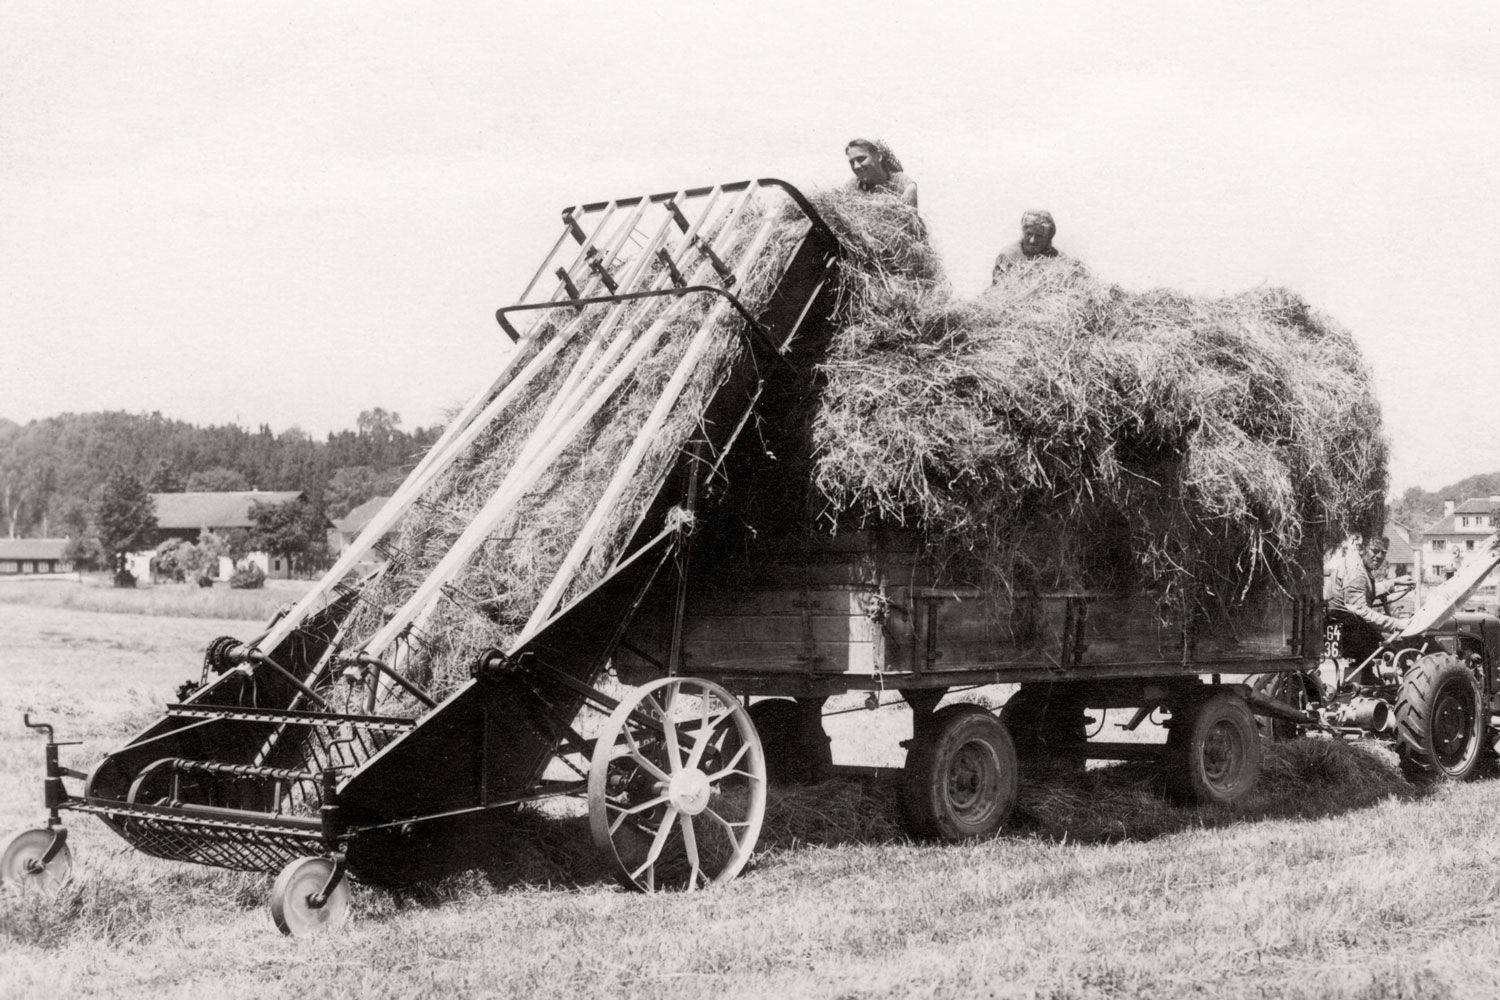 1951: The hay harvest has never been so quick and easy as with the hay loader from Grieskirchen.